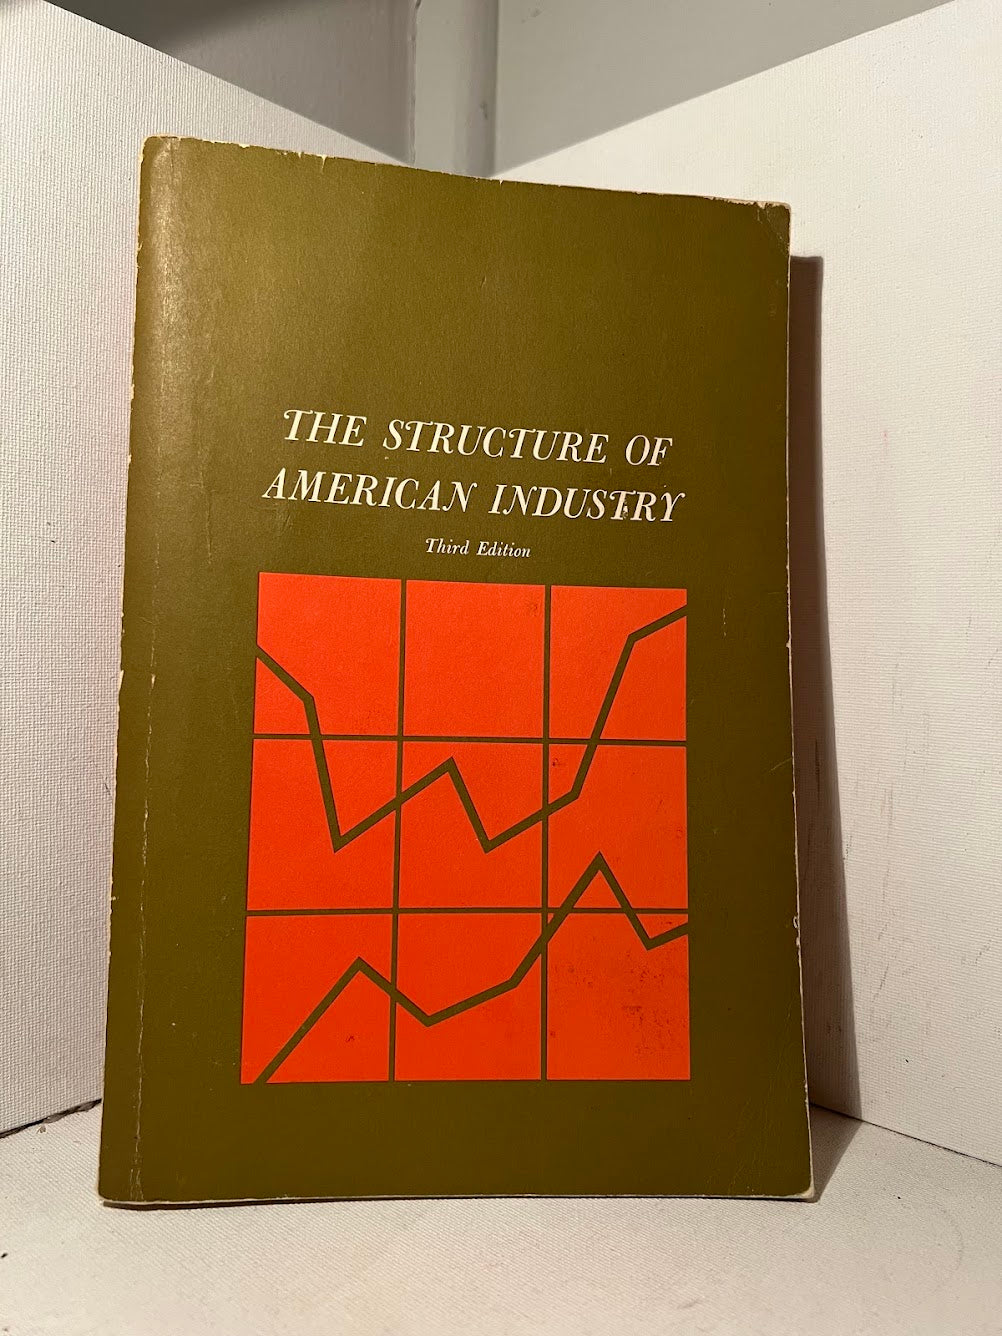 The Structure of American Industry (Third Edition) by Walter Adams